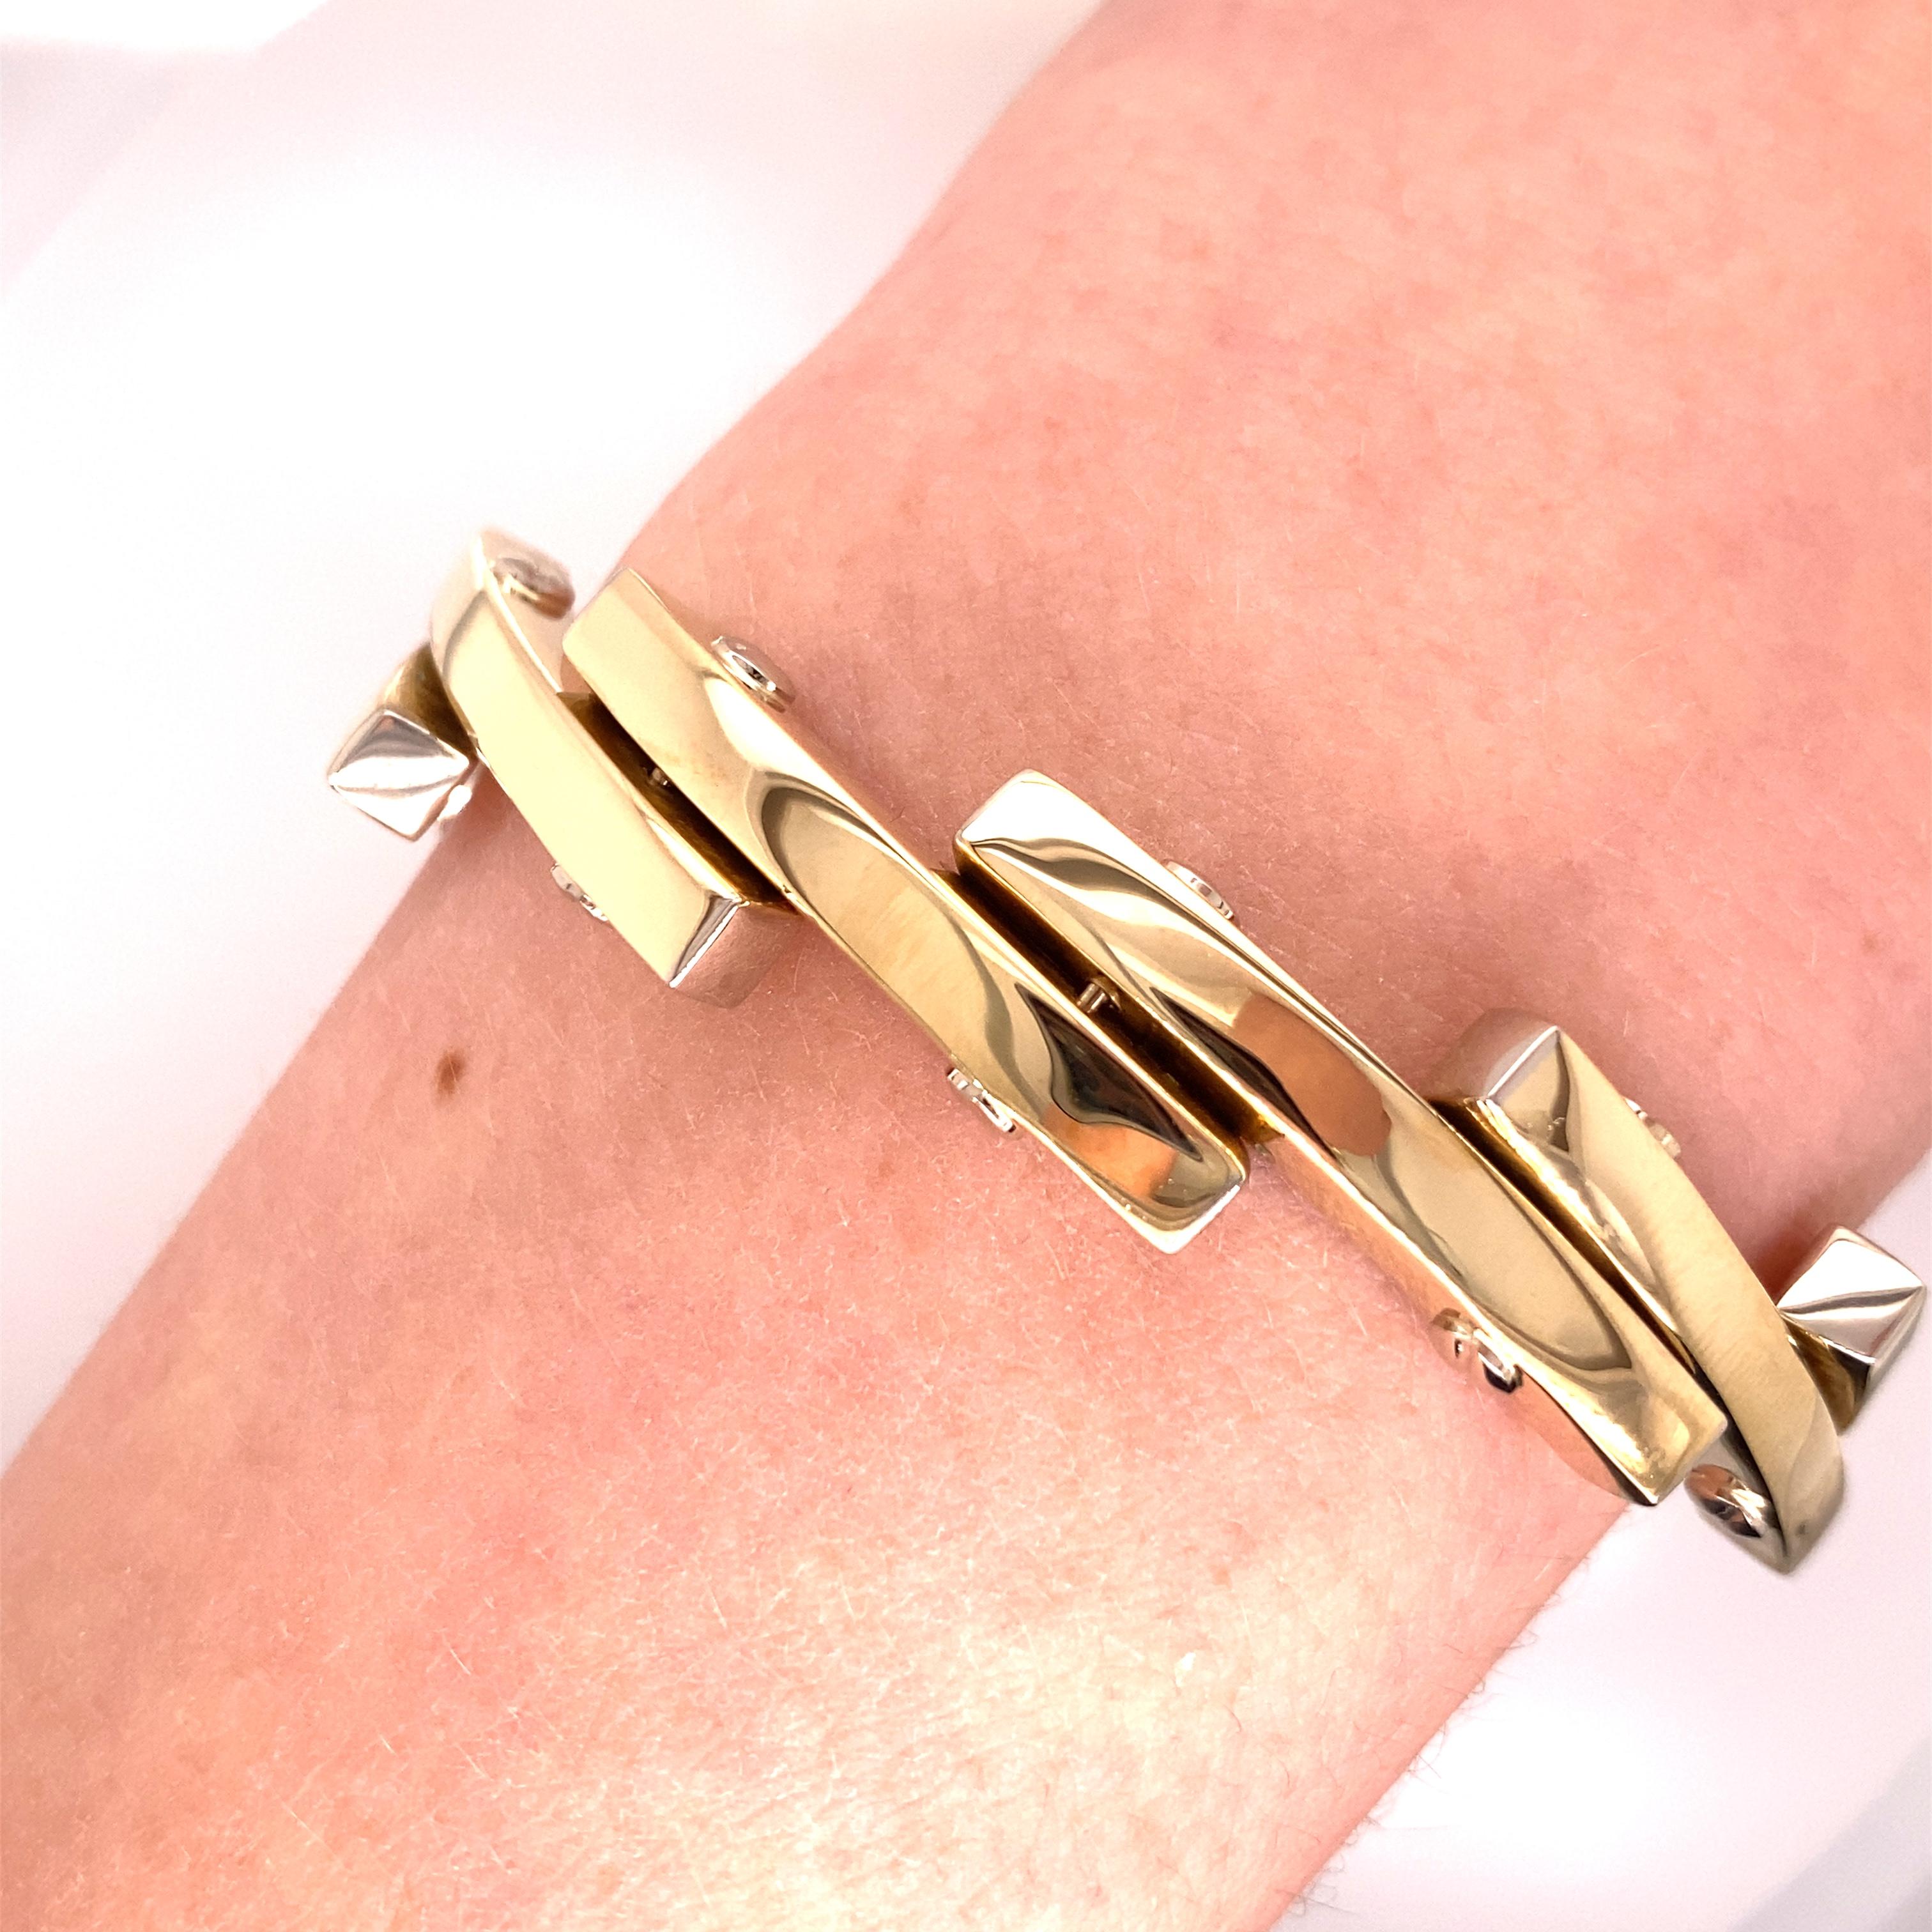 Vintage 1990's 14K Yellow Gold Italian Made Link Bracelet. The bracelet measures 7 inches long and .4 inches wide. The bracelet weighs 19 grams. 